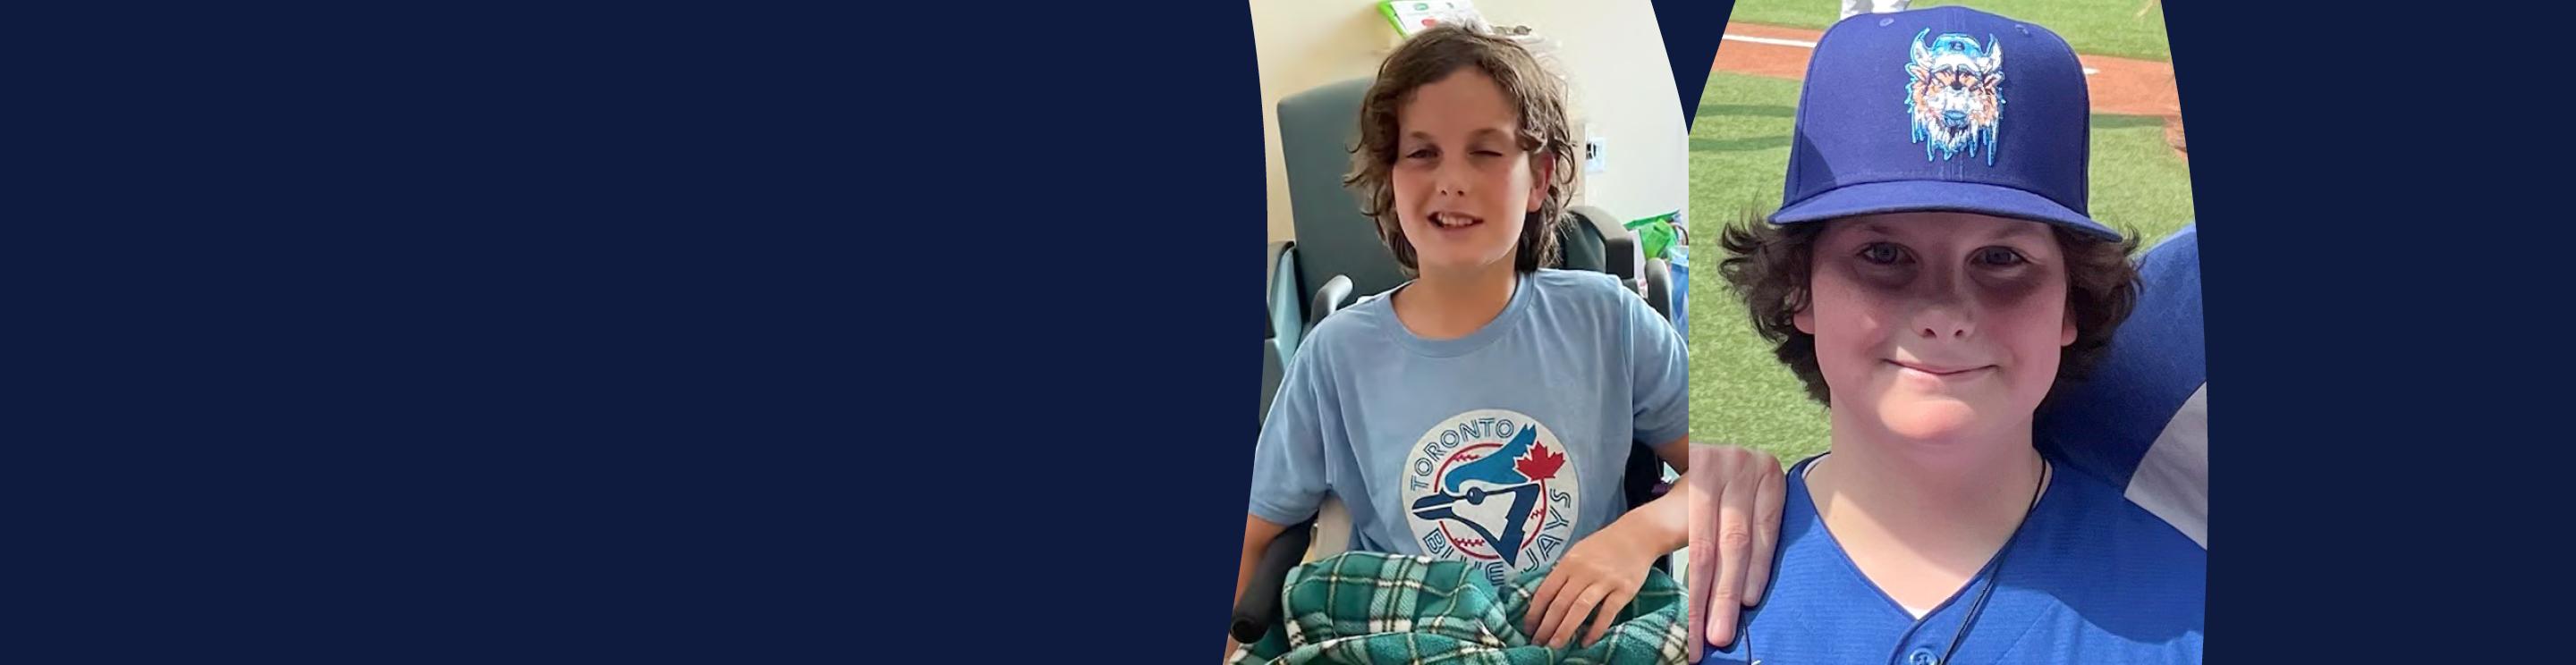 Image of IWK patient Satchel Tate in hospital and in baseball uniform